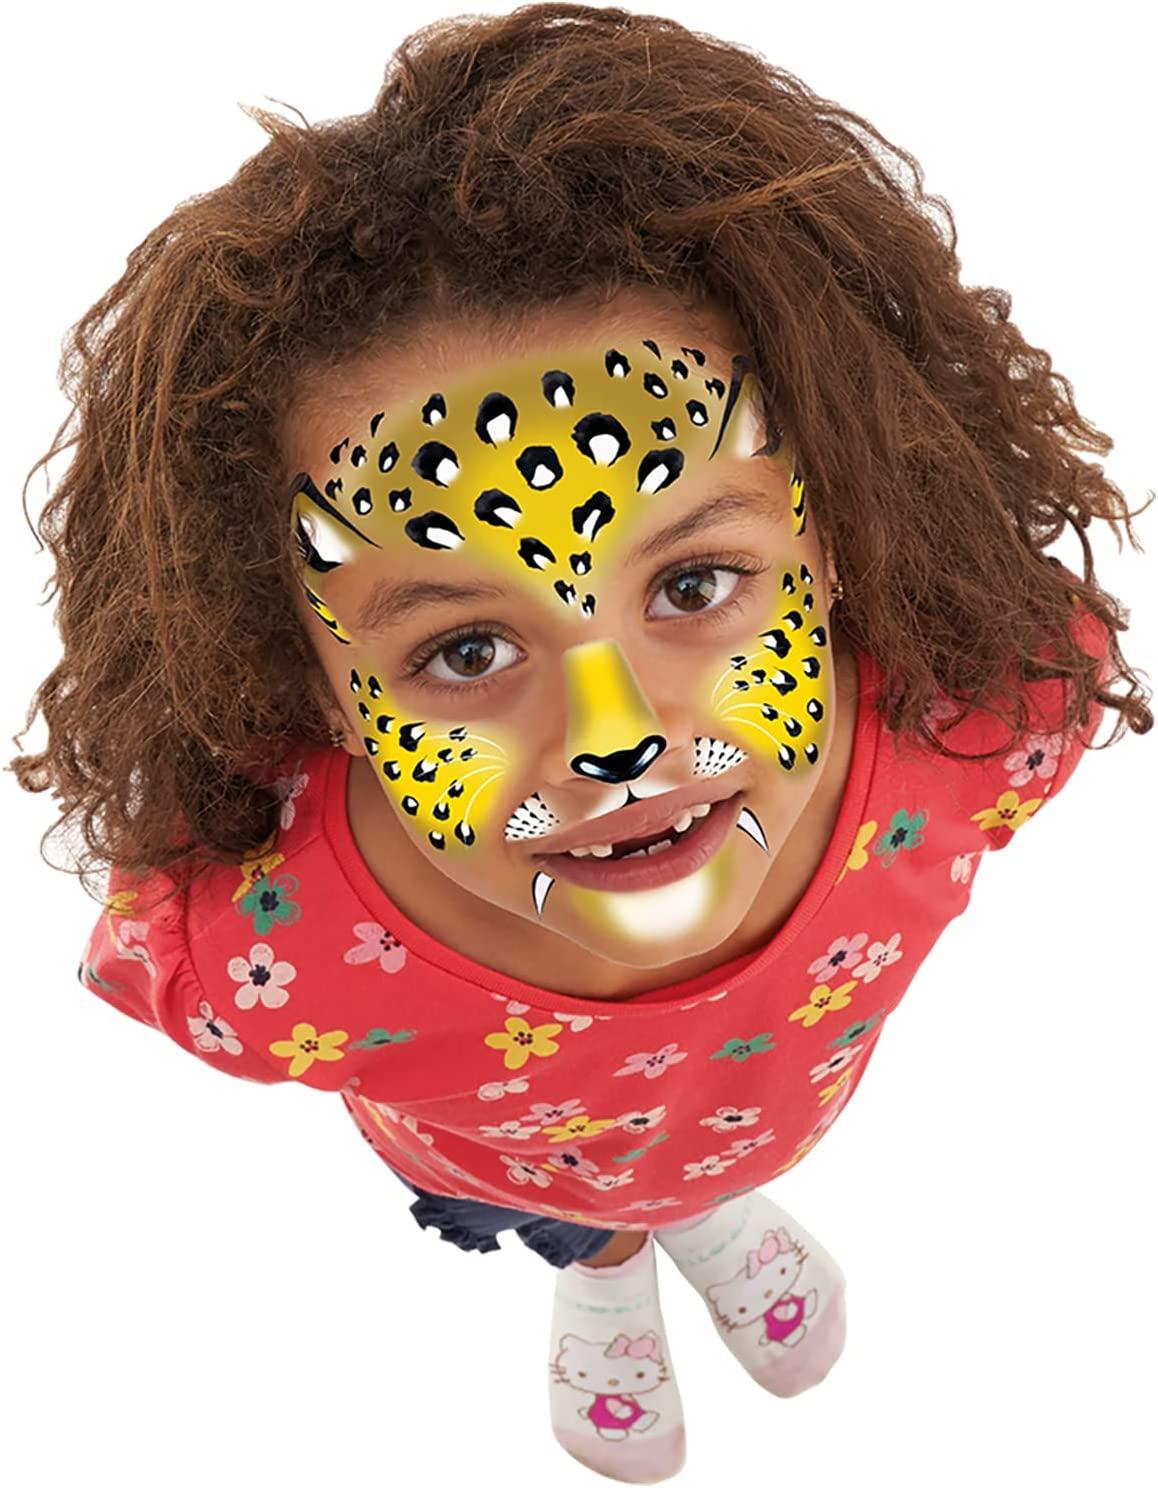  Face Paintoos — PAW Patrol — Face Design for a Face Paint  Alternative — for Kids Ages 4+ : Arts, Crafts & Sewing